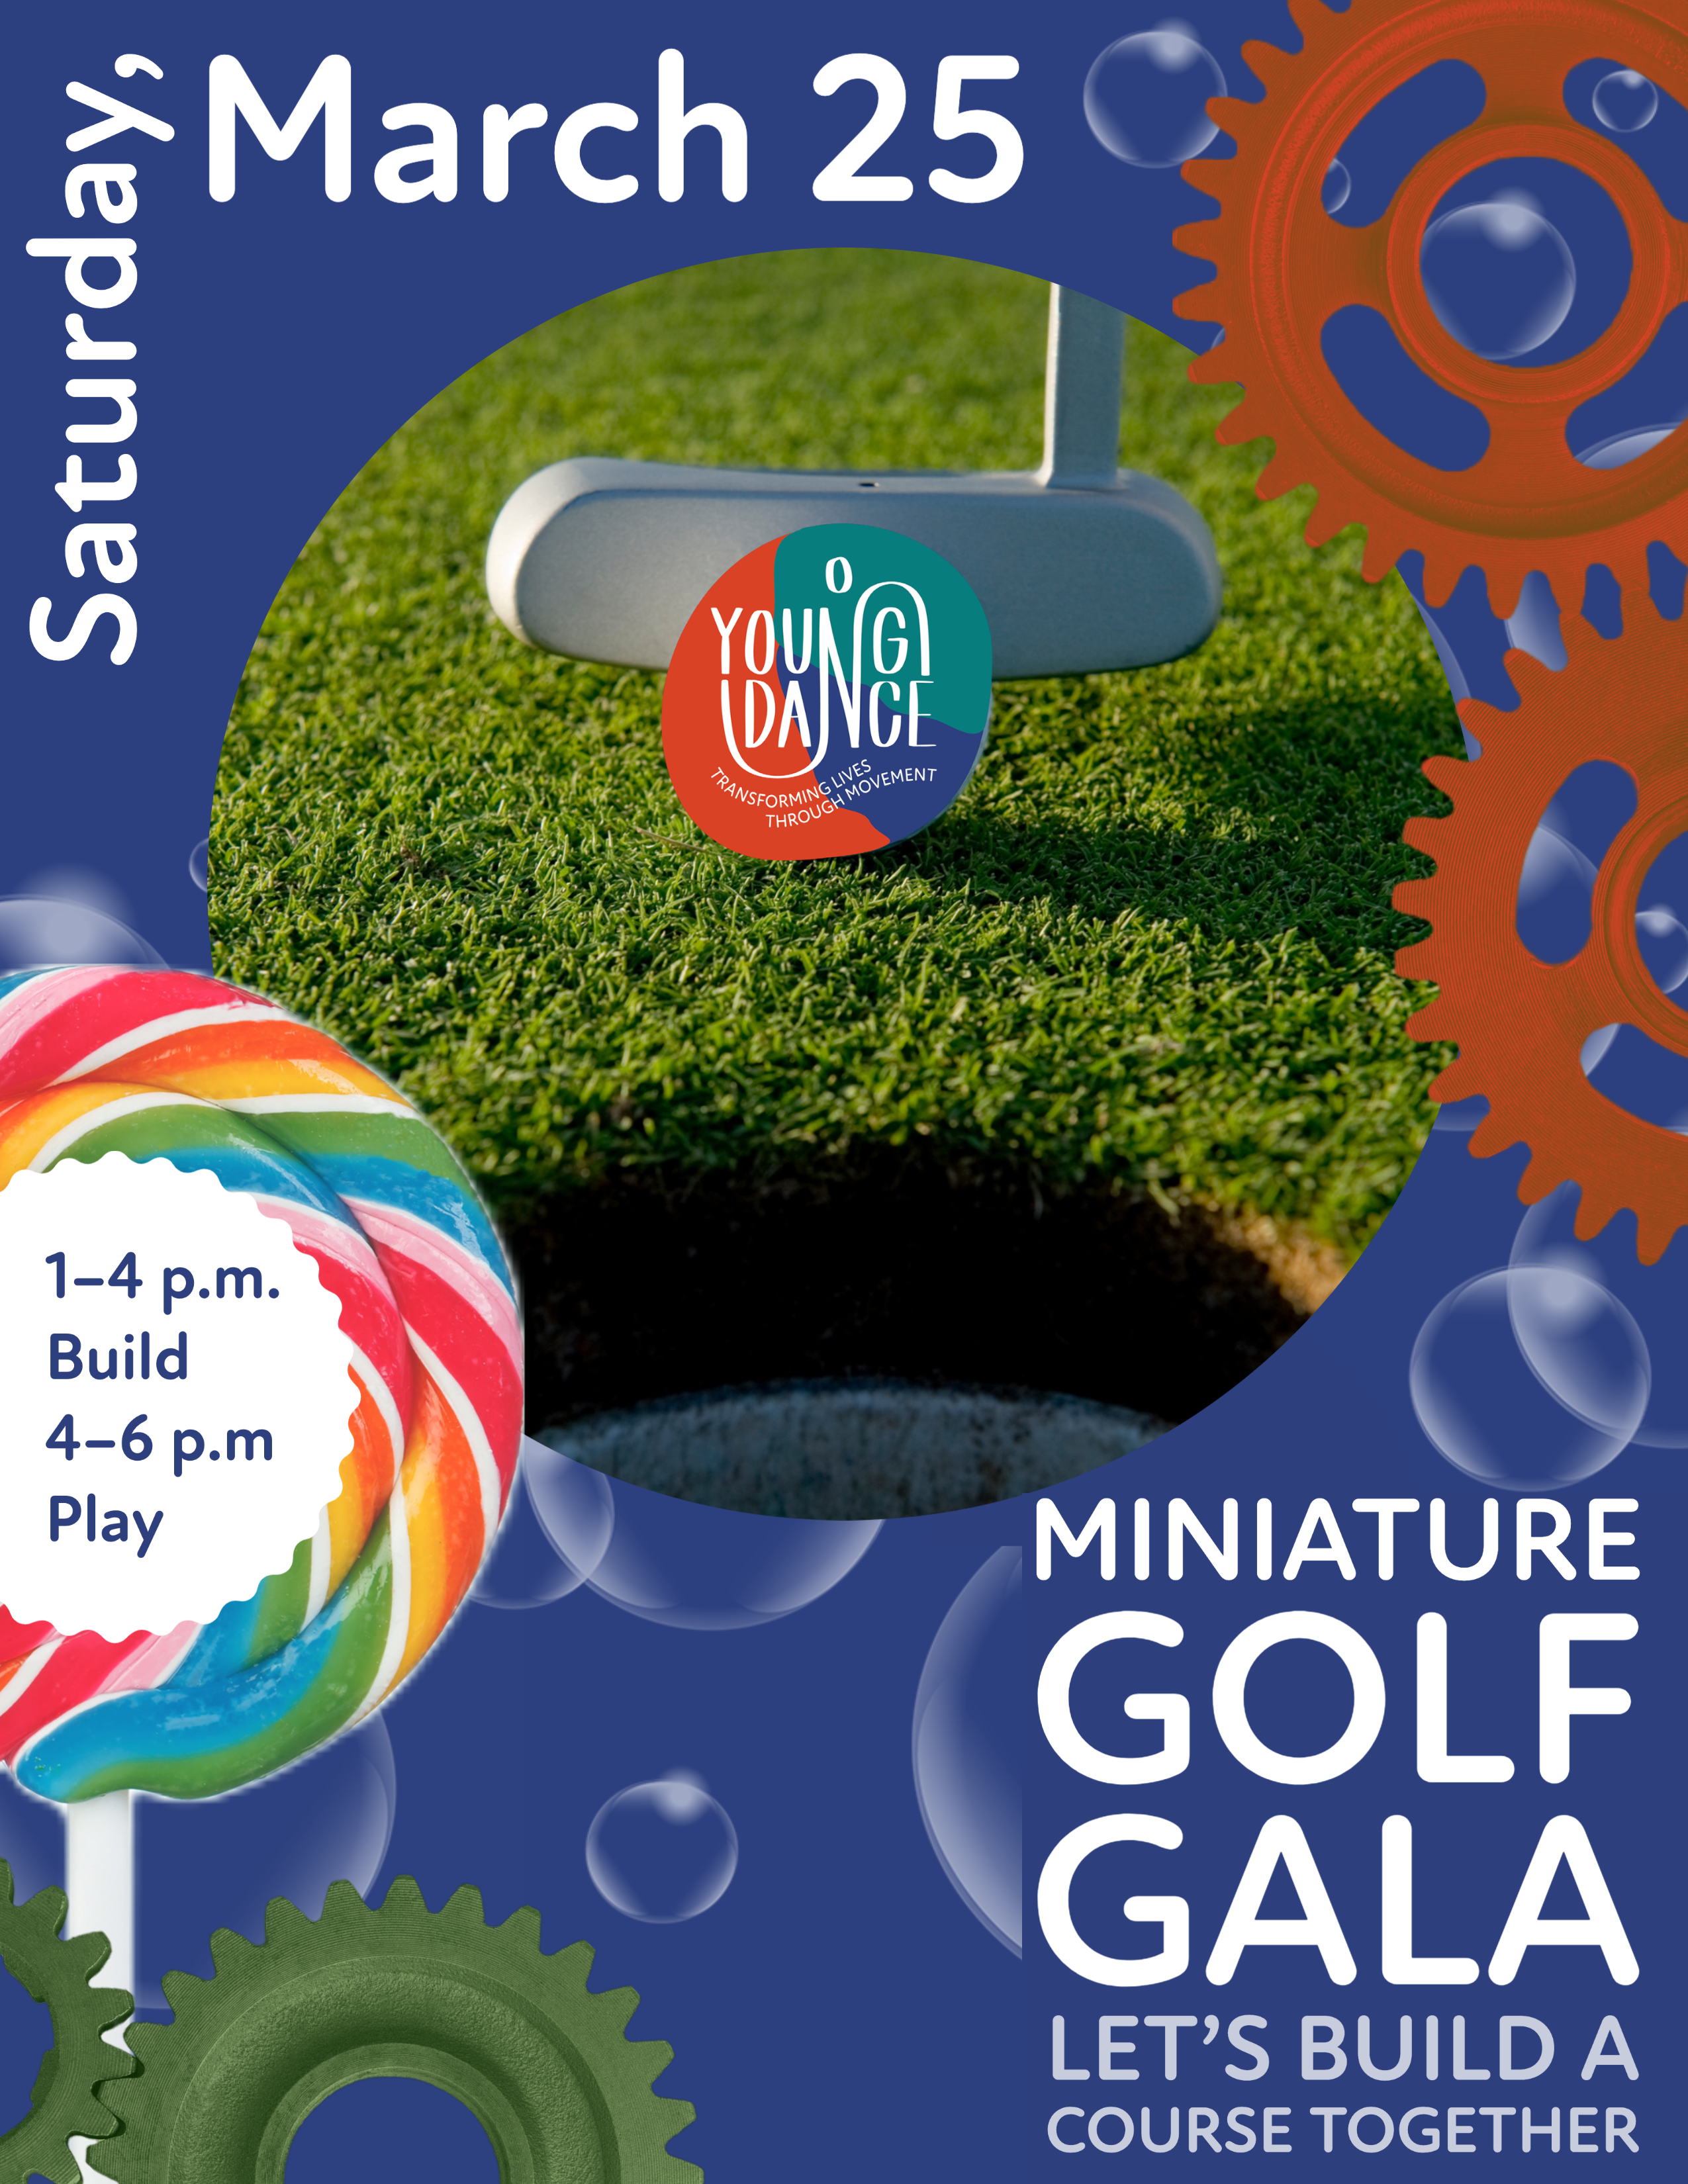 Image of a Young Dance golf ball with text Saturday March 25 Build 1-4 Play 4-6 Miniature Golf Gala.